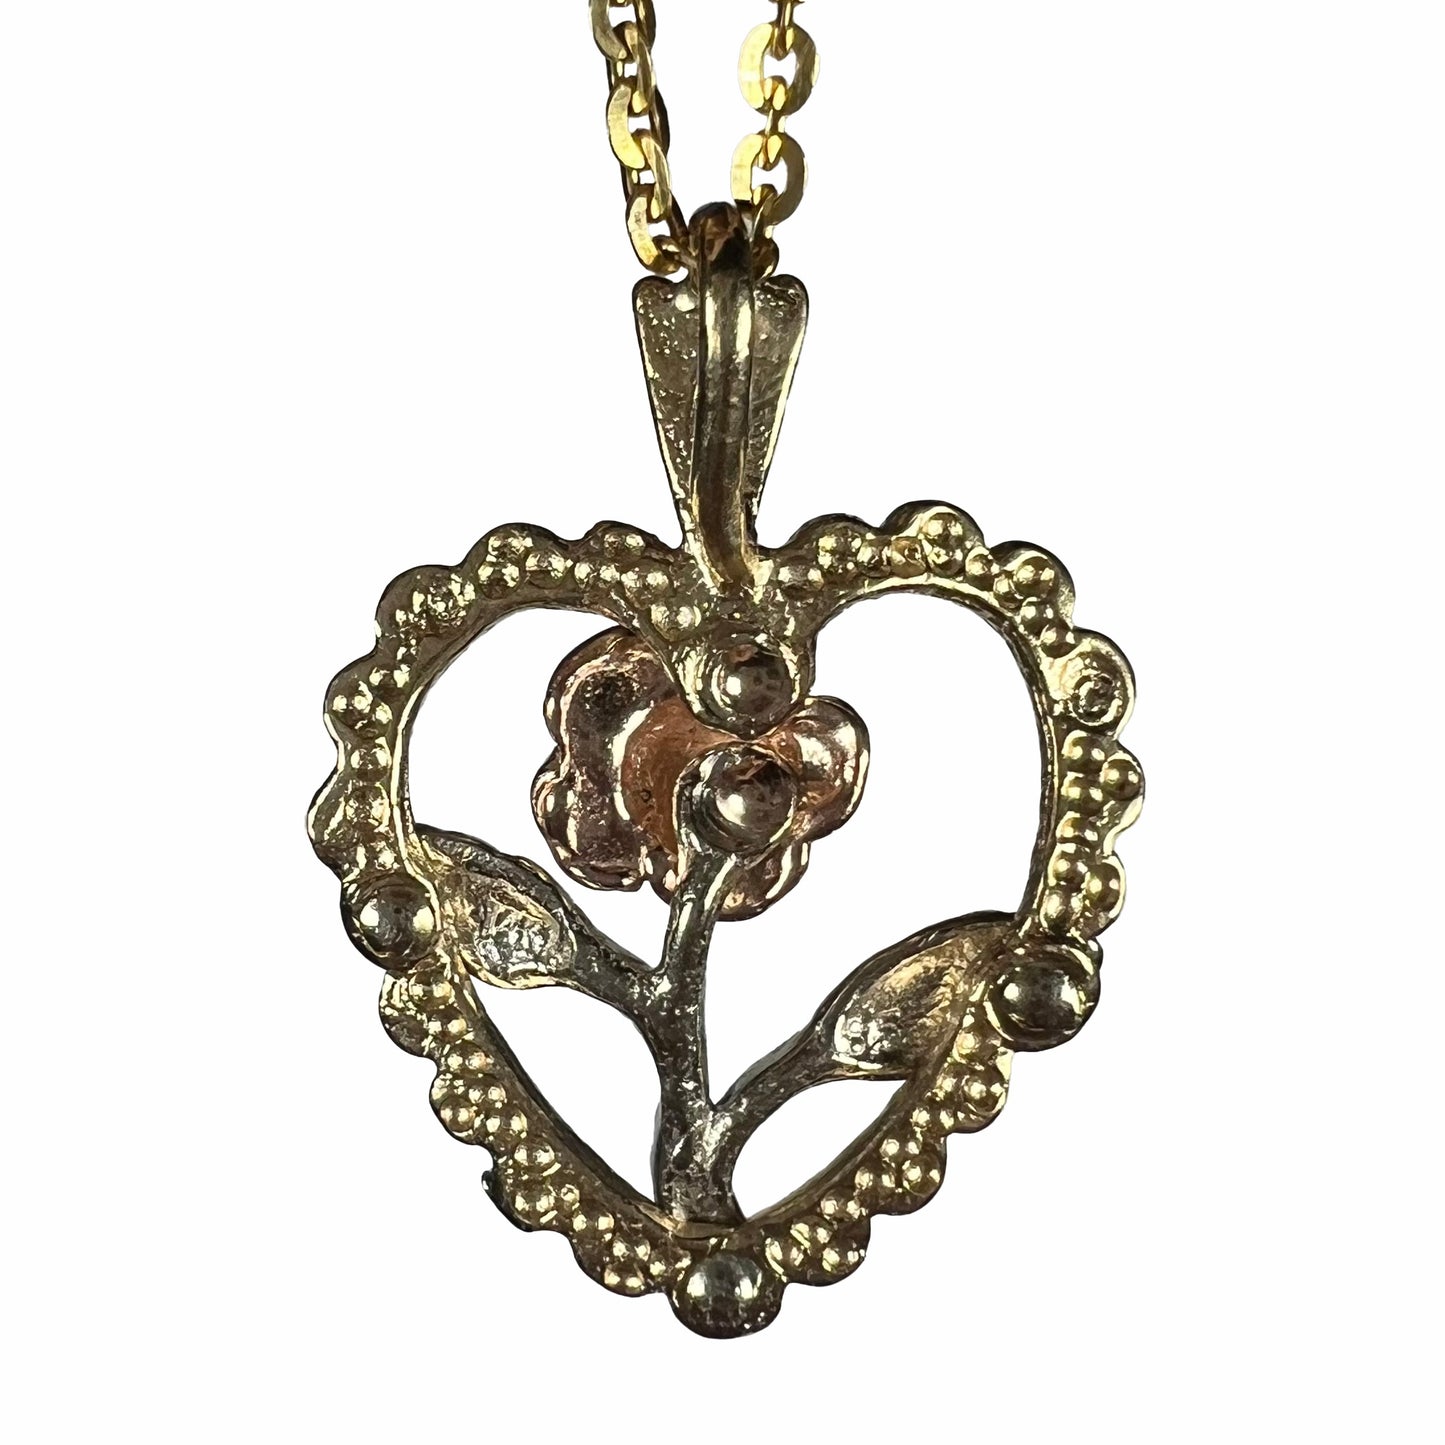 A tricolor gold pendant featuring the design of a heart with a flower in the middle of it.